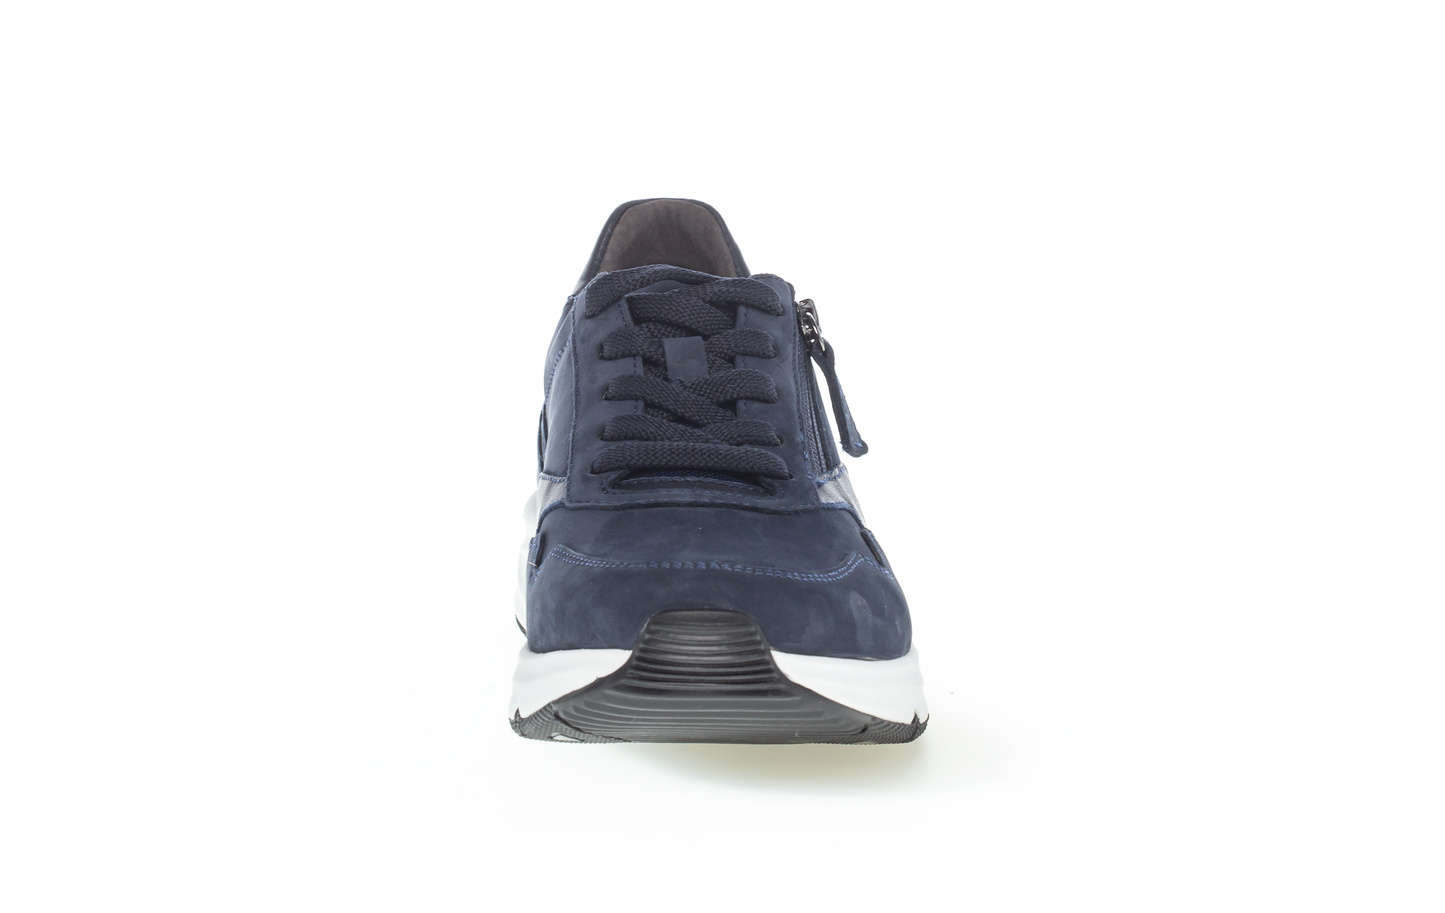 Gabor 96.898.46 Rollingsoft Blue/Navy Blue Sneakers with Zip